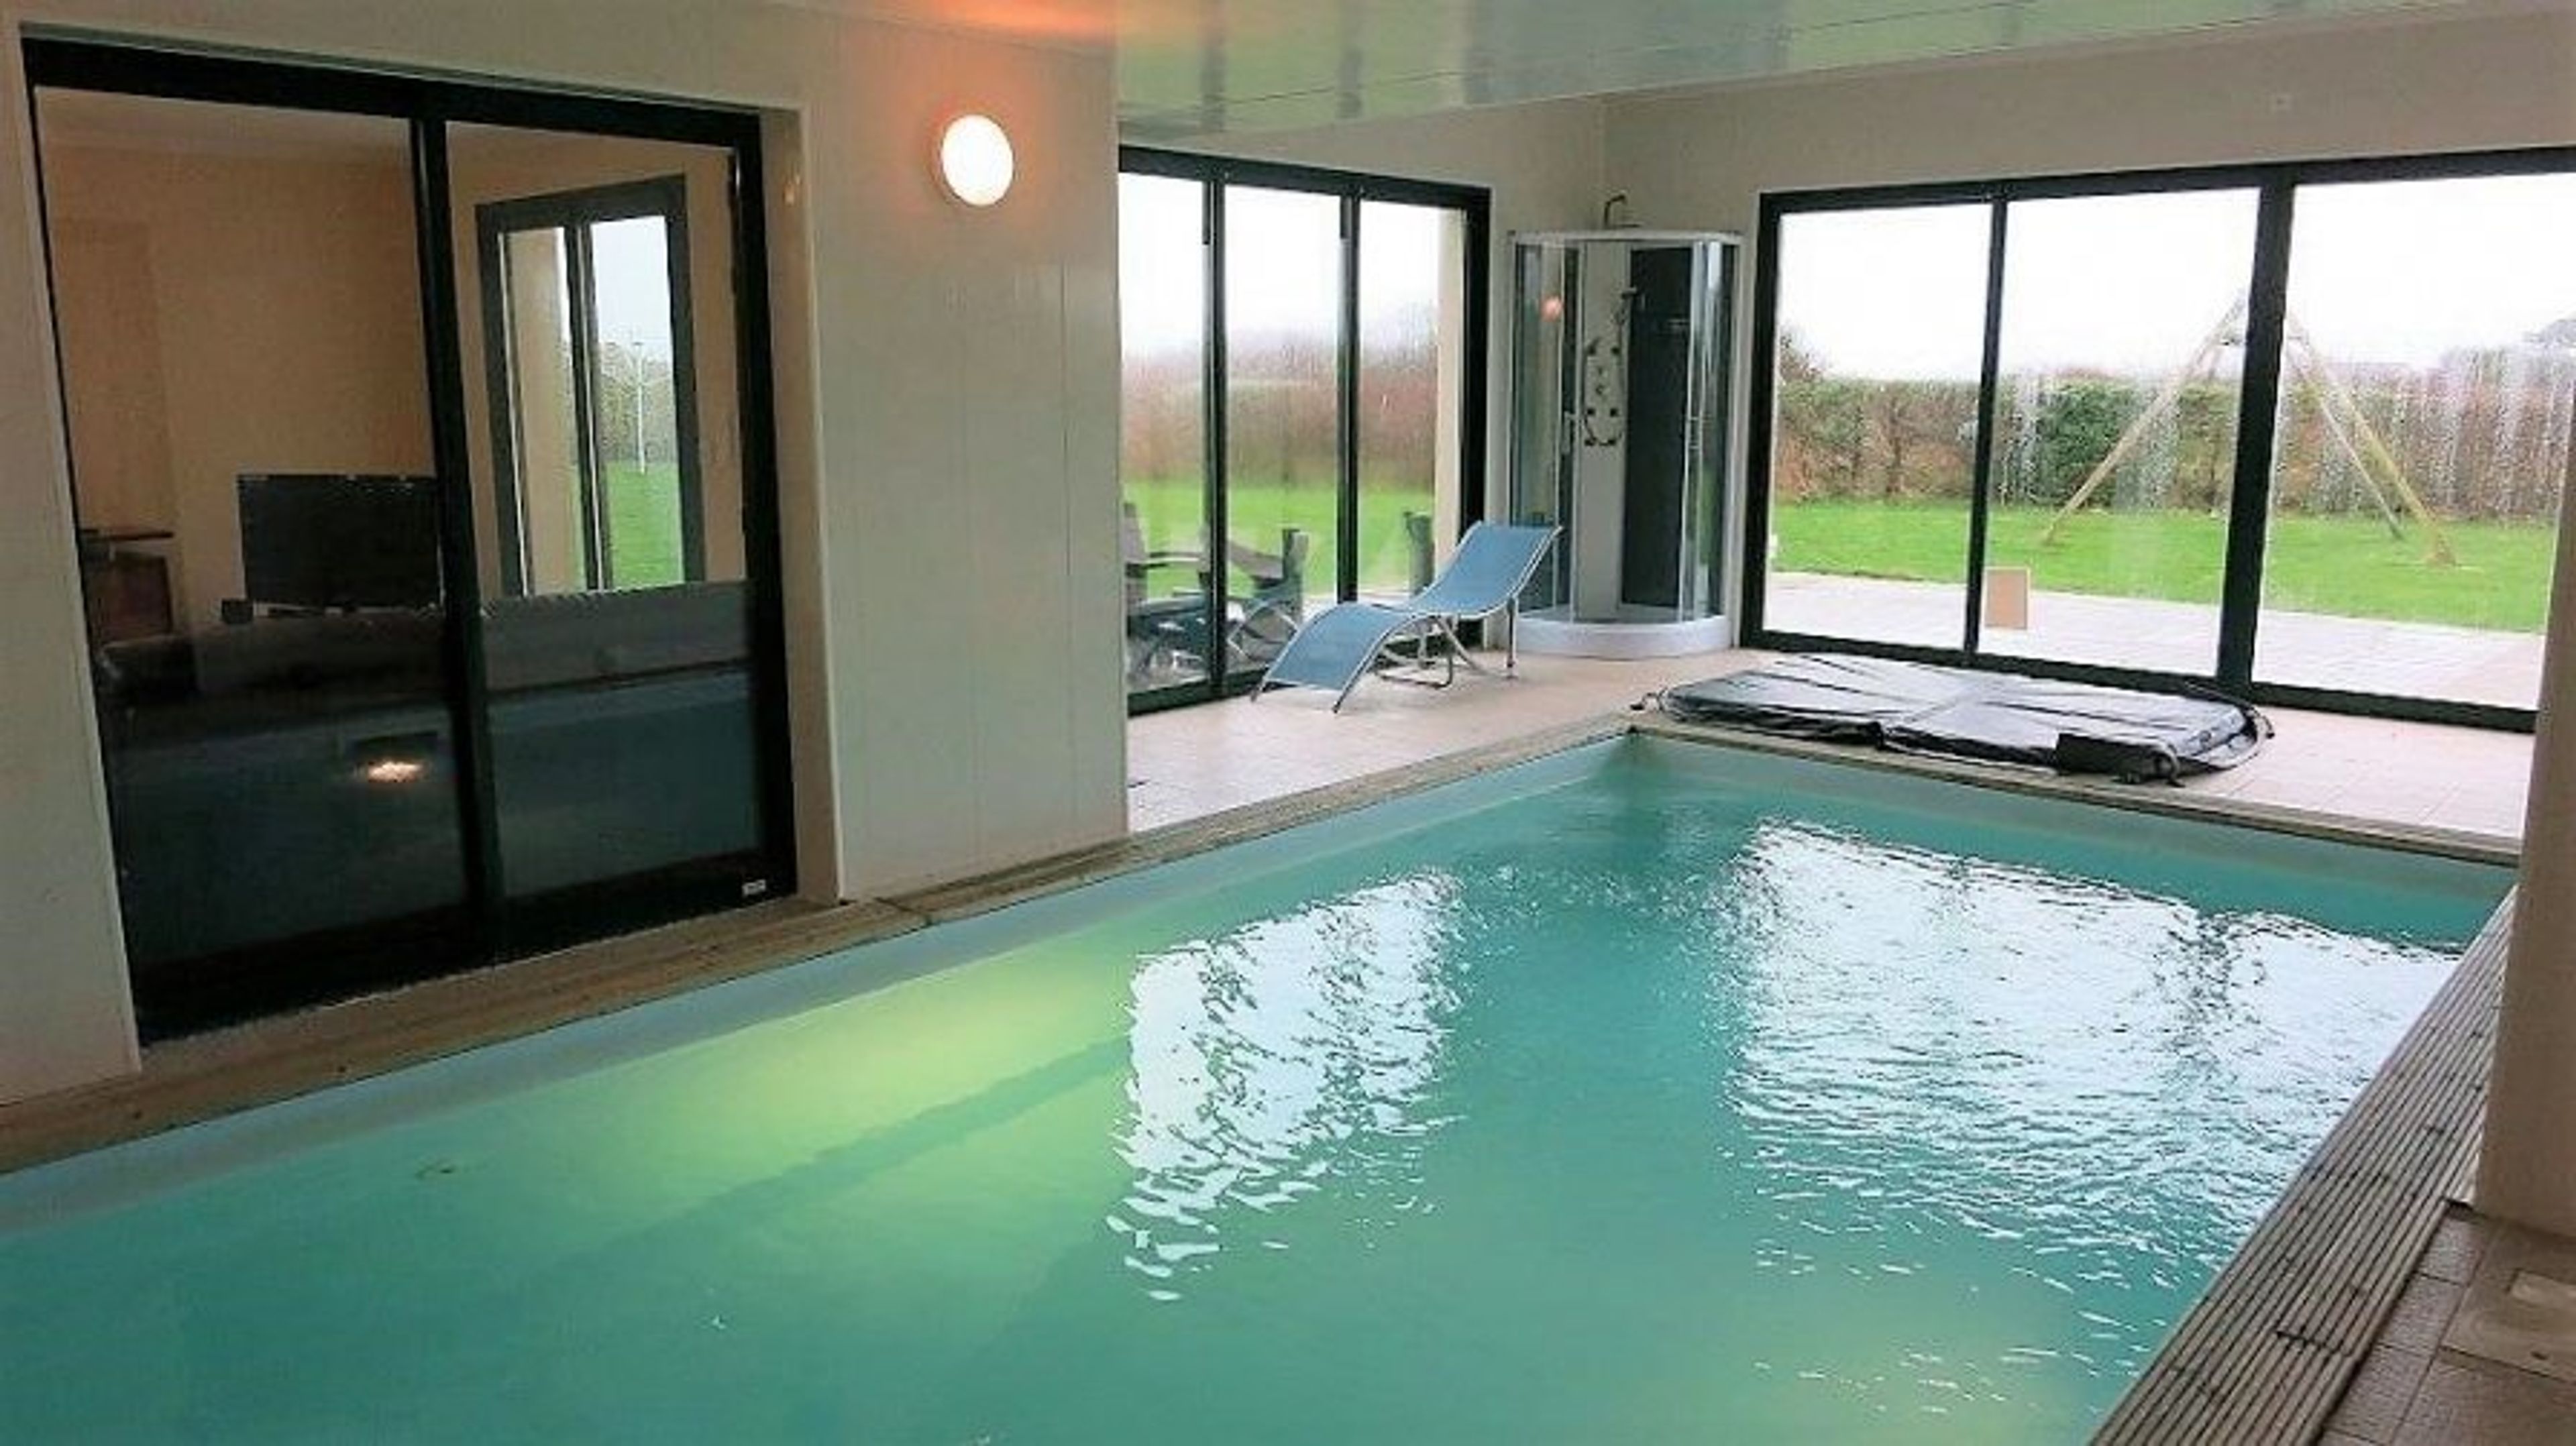 Private indoor heated pool. Heated (28°c). Counter current swimming.